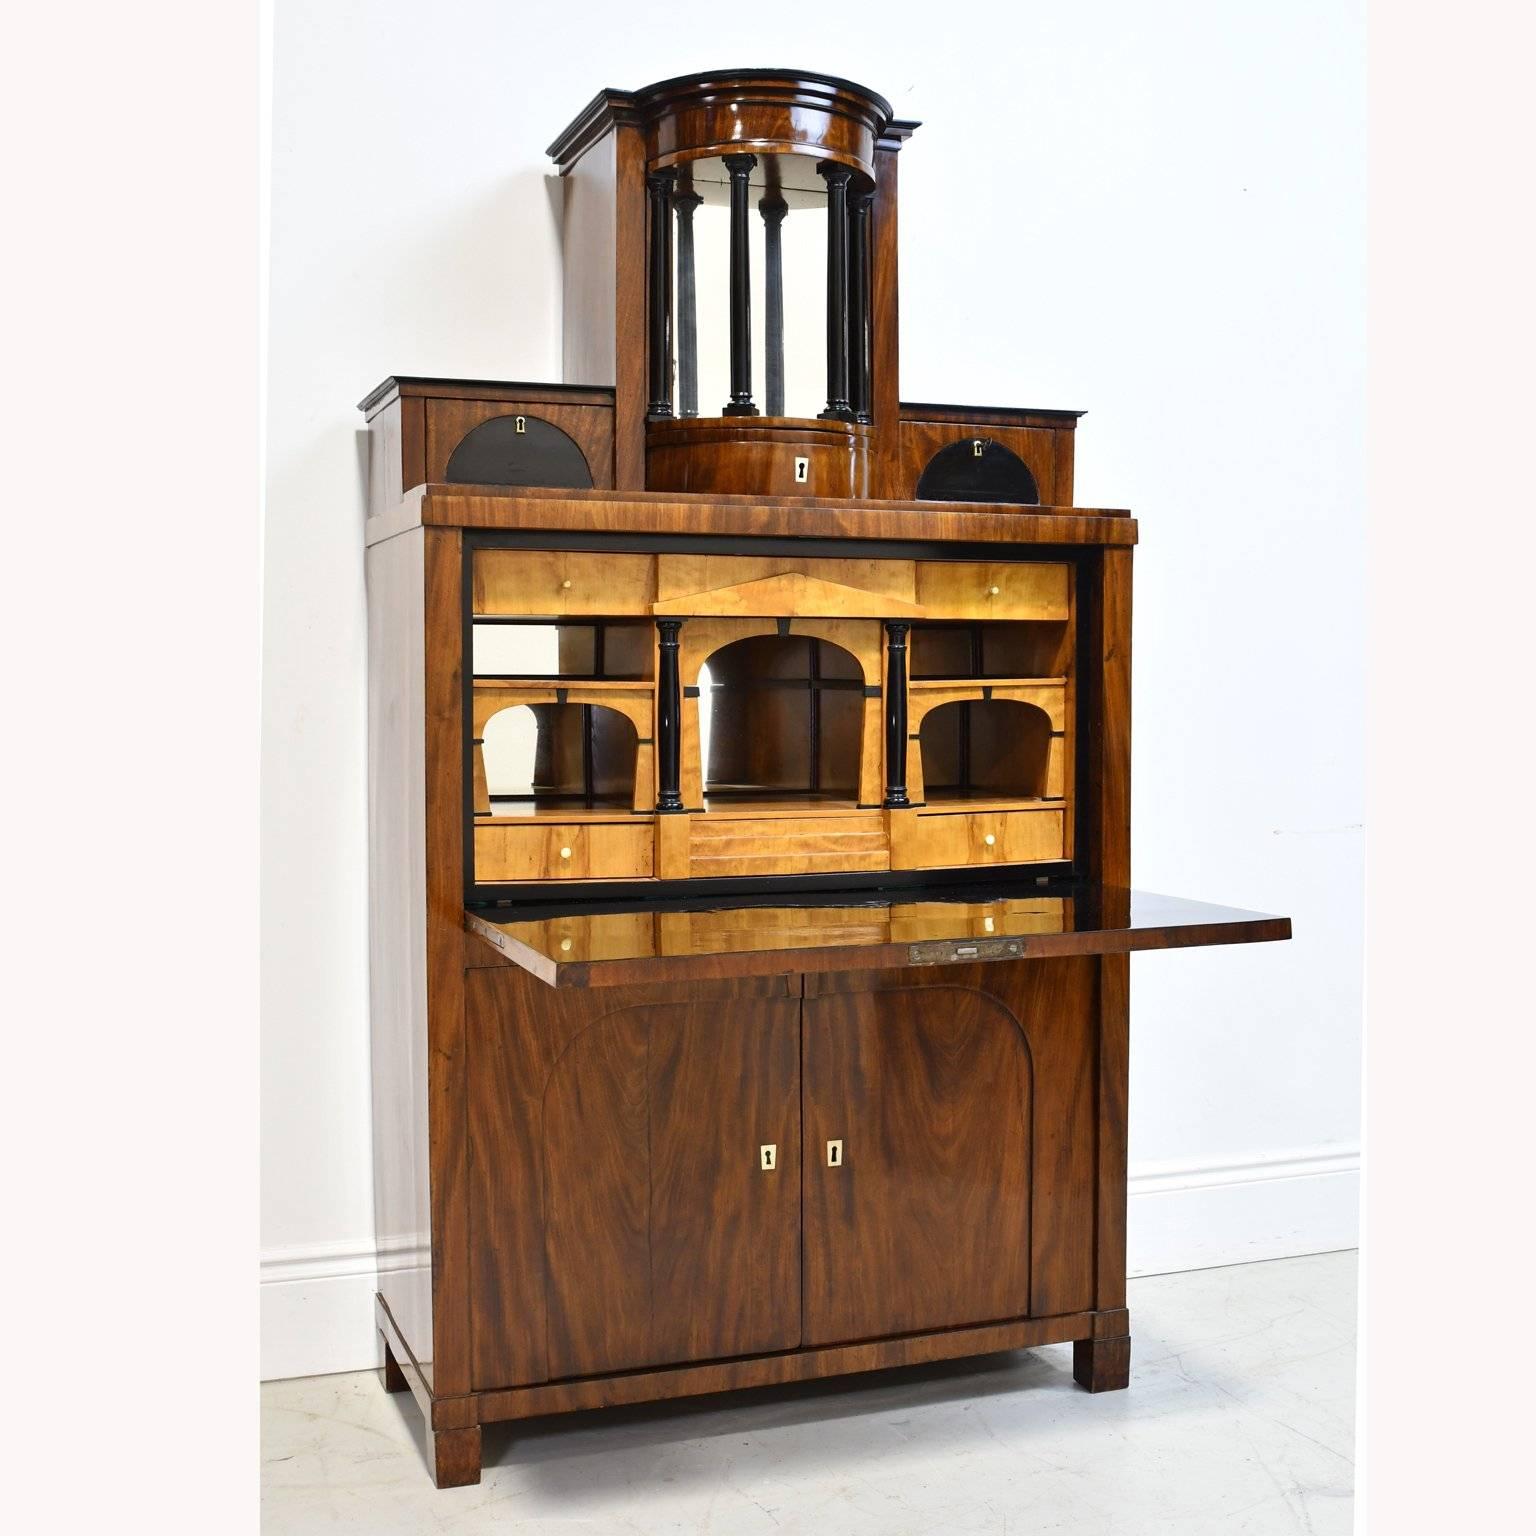 A handsome Swedish Karl Johan Empire Secretary a style better known throughout most of Europe in 1820 as Biedermeier. In mahogany with birch interior and ebonized details. Top gallery consists of three drawers and mirrored colonnade opening to